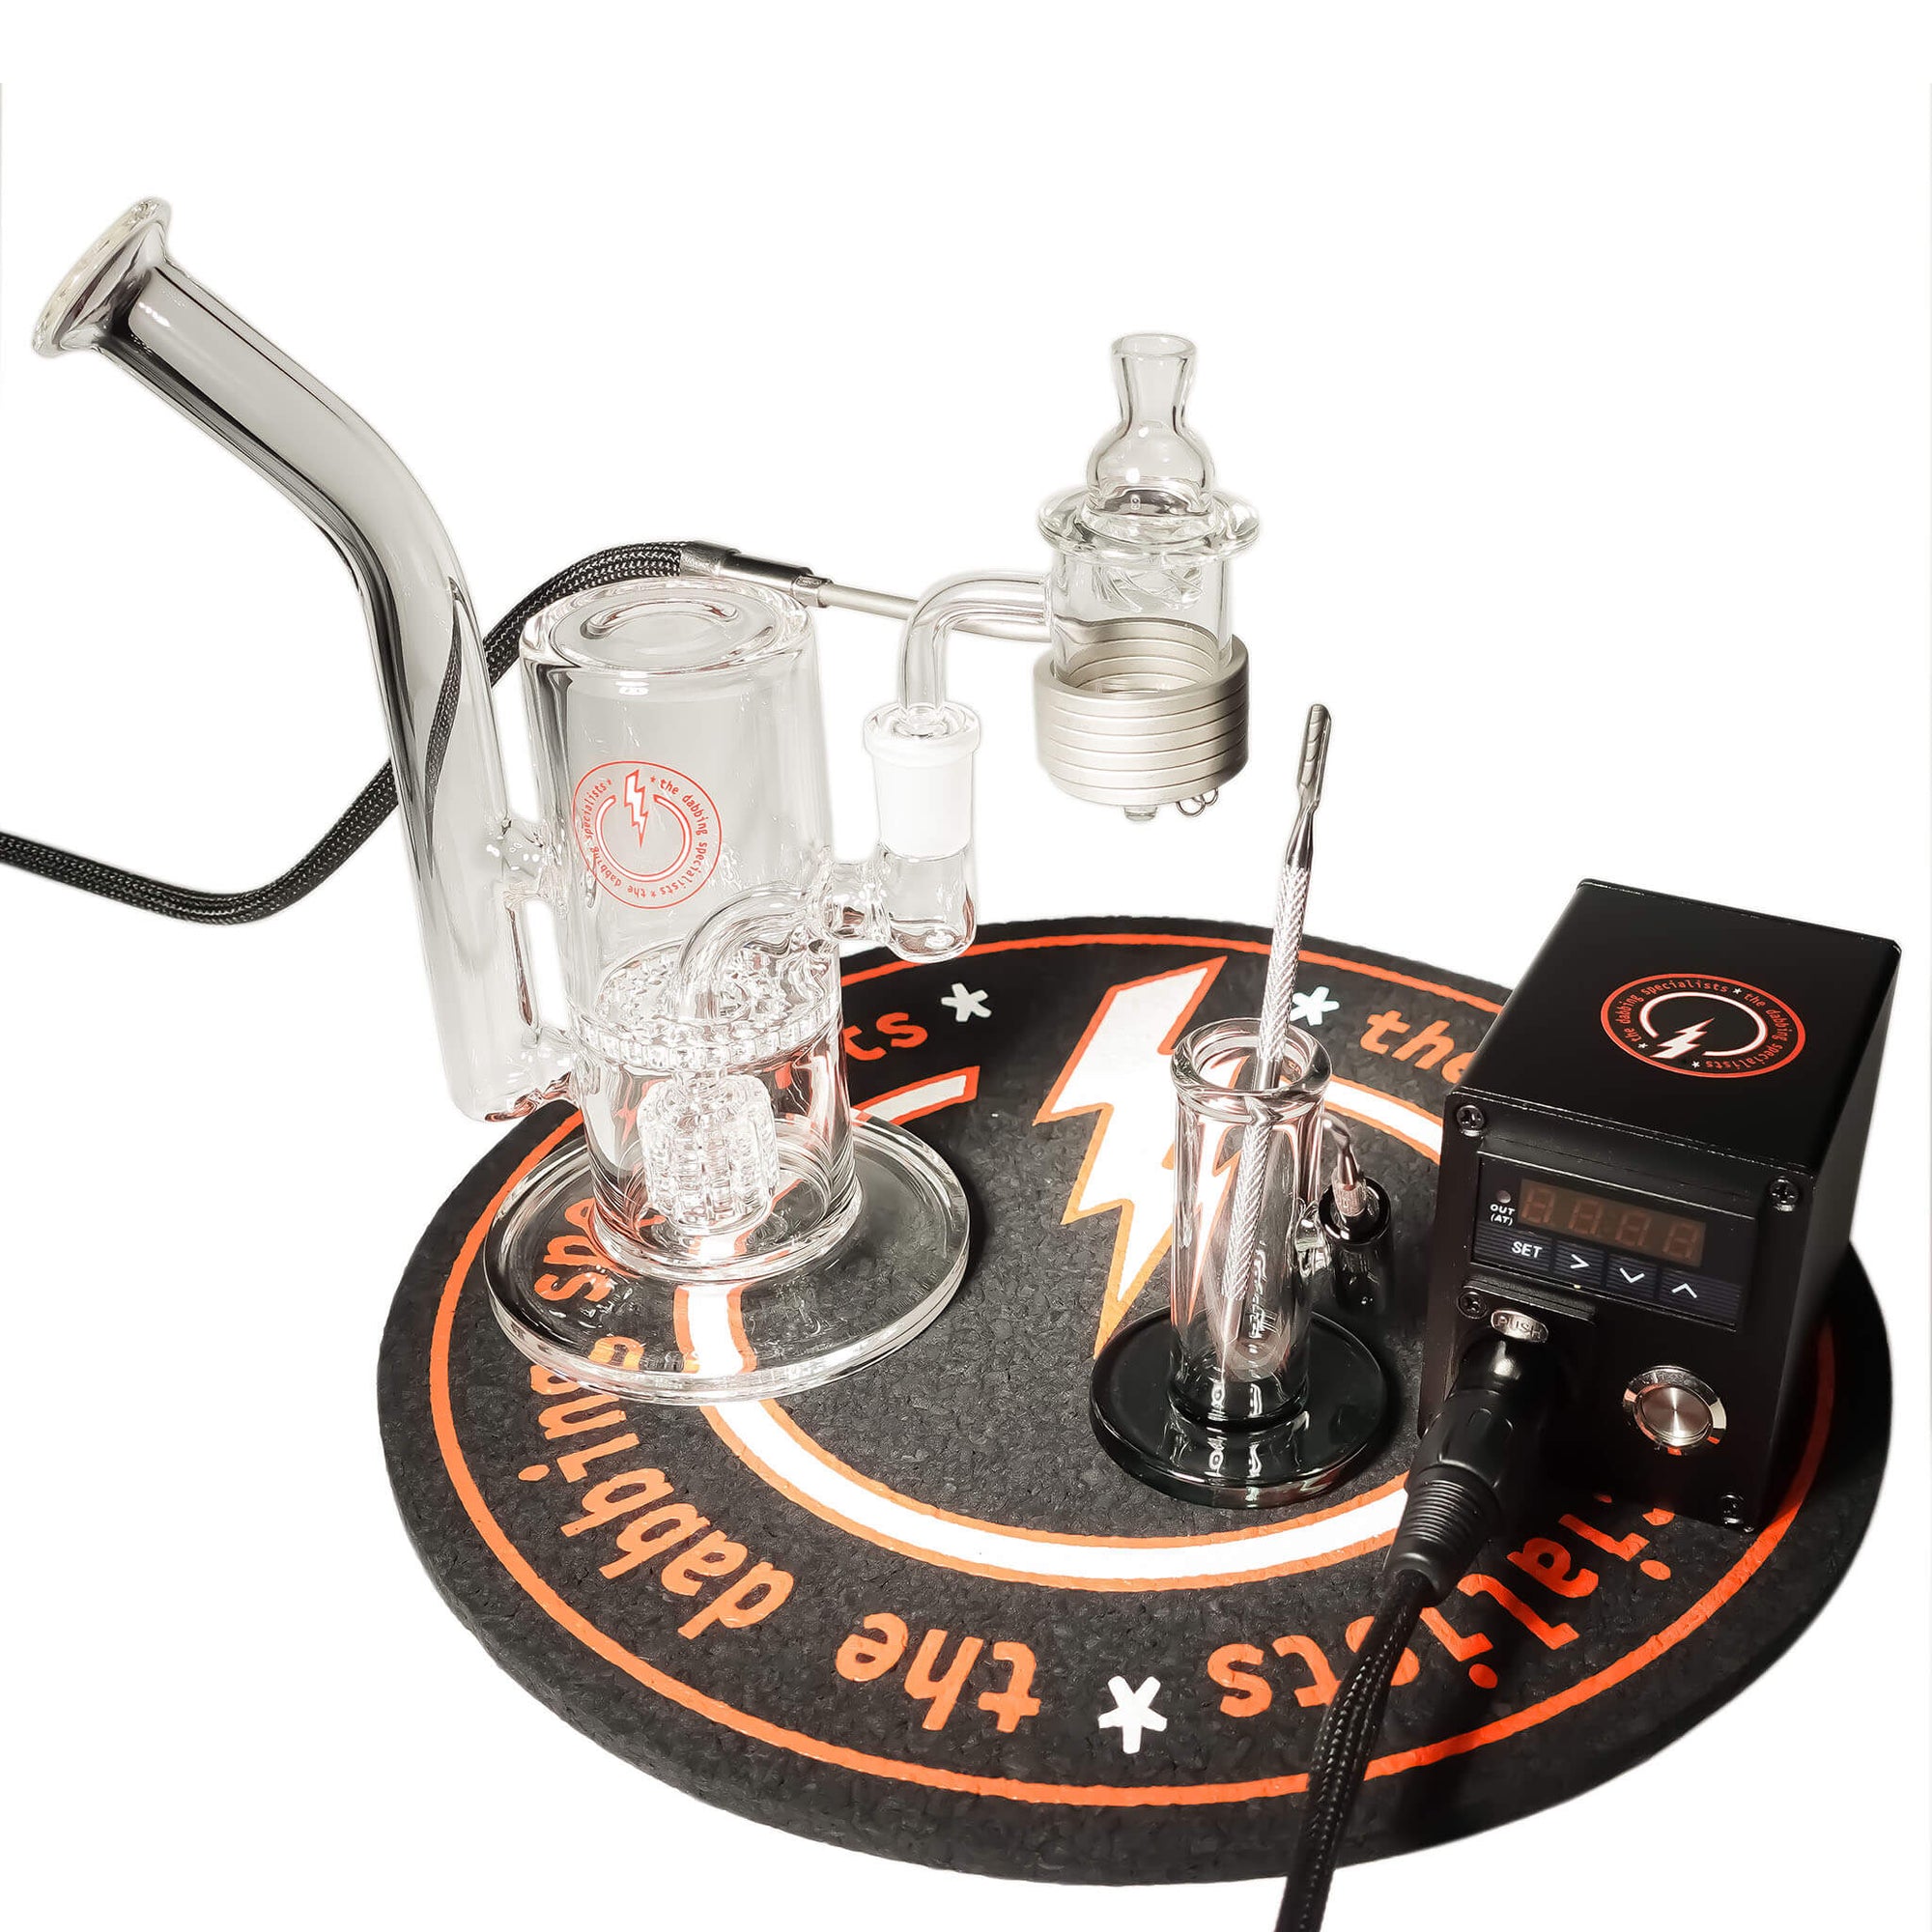 Reborn 30mm E-Banger Deluxe Enail Kit | Blue Kit View | the dabbing specialists